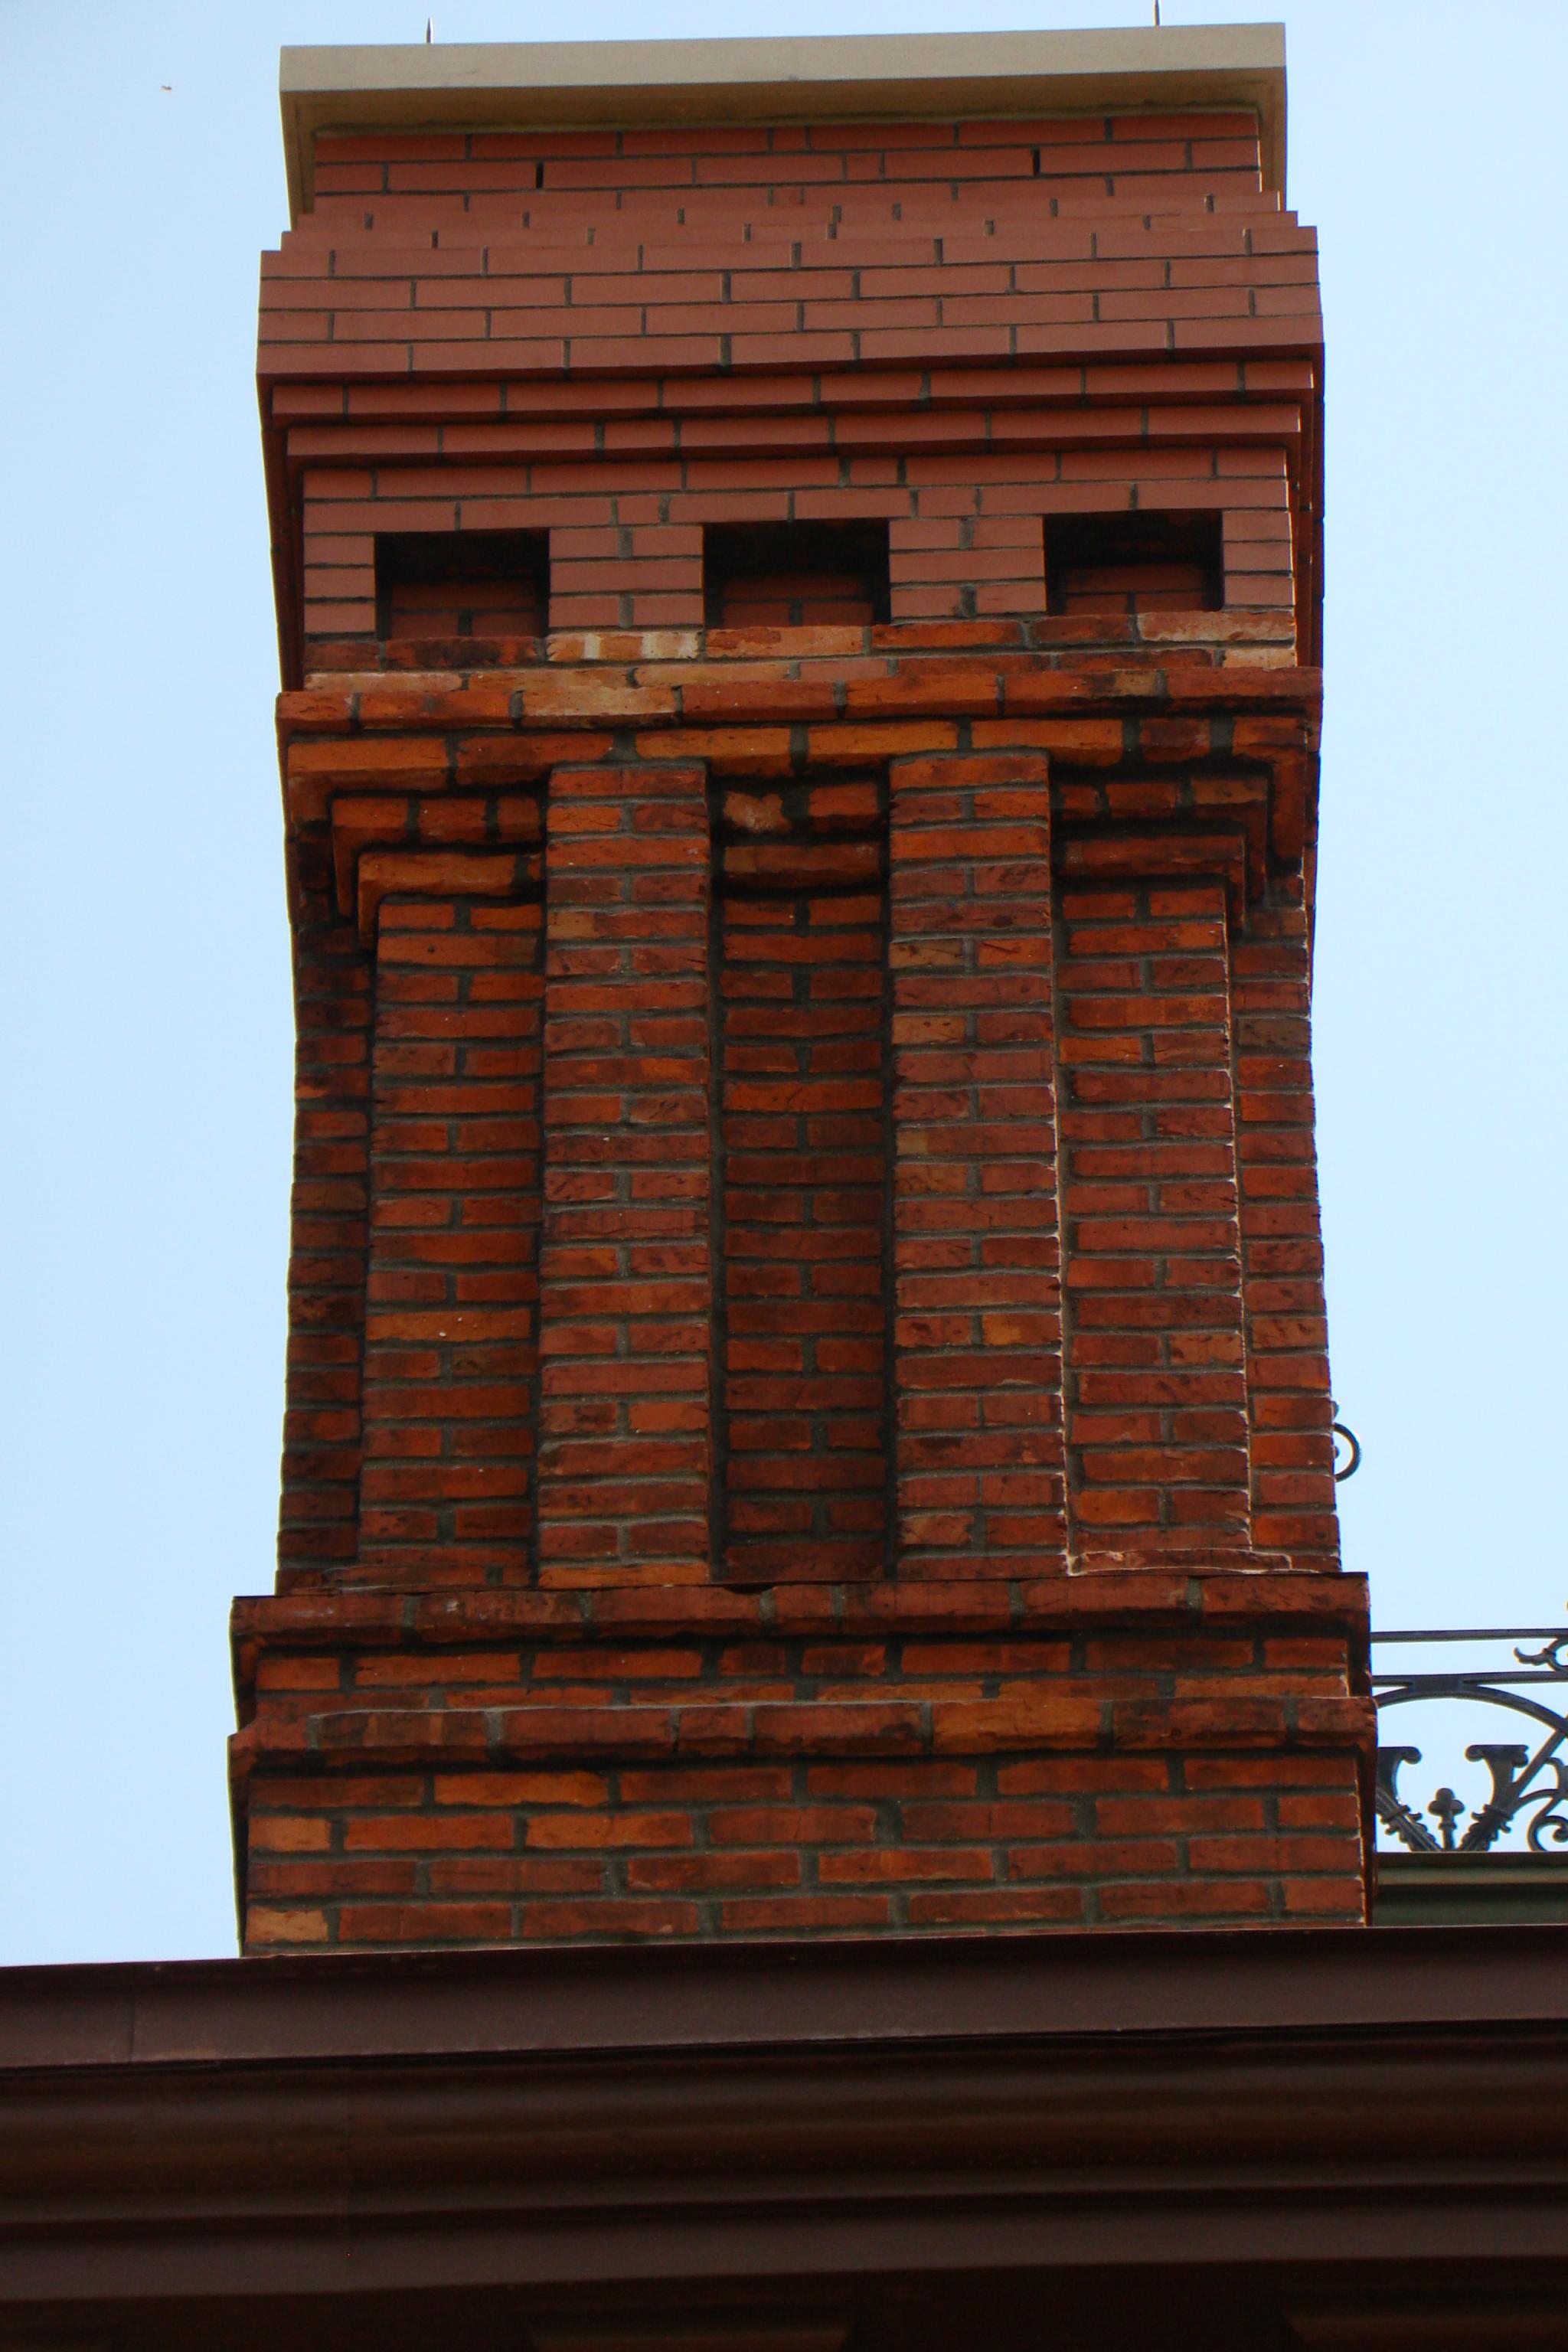 Queen Anne style patterned masonry on chimney, Martin-Mitchell Mansion